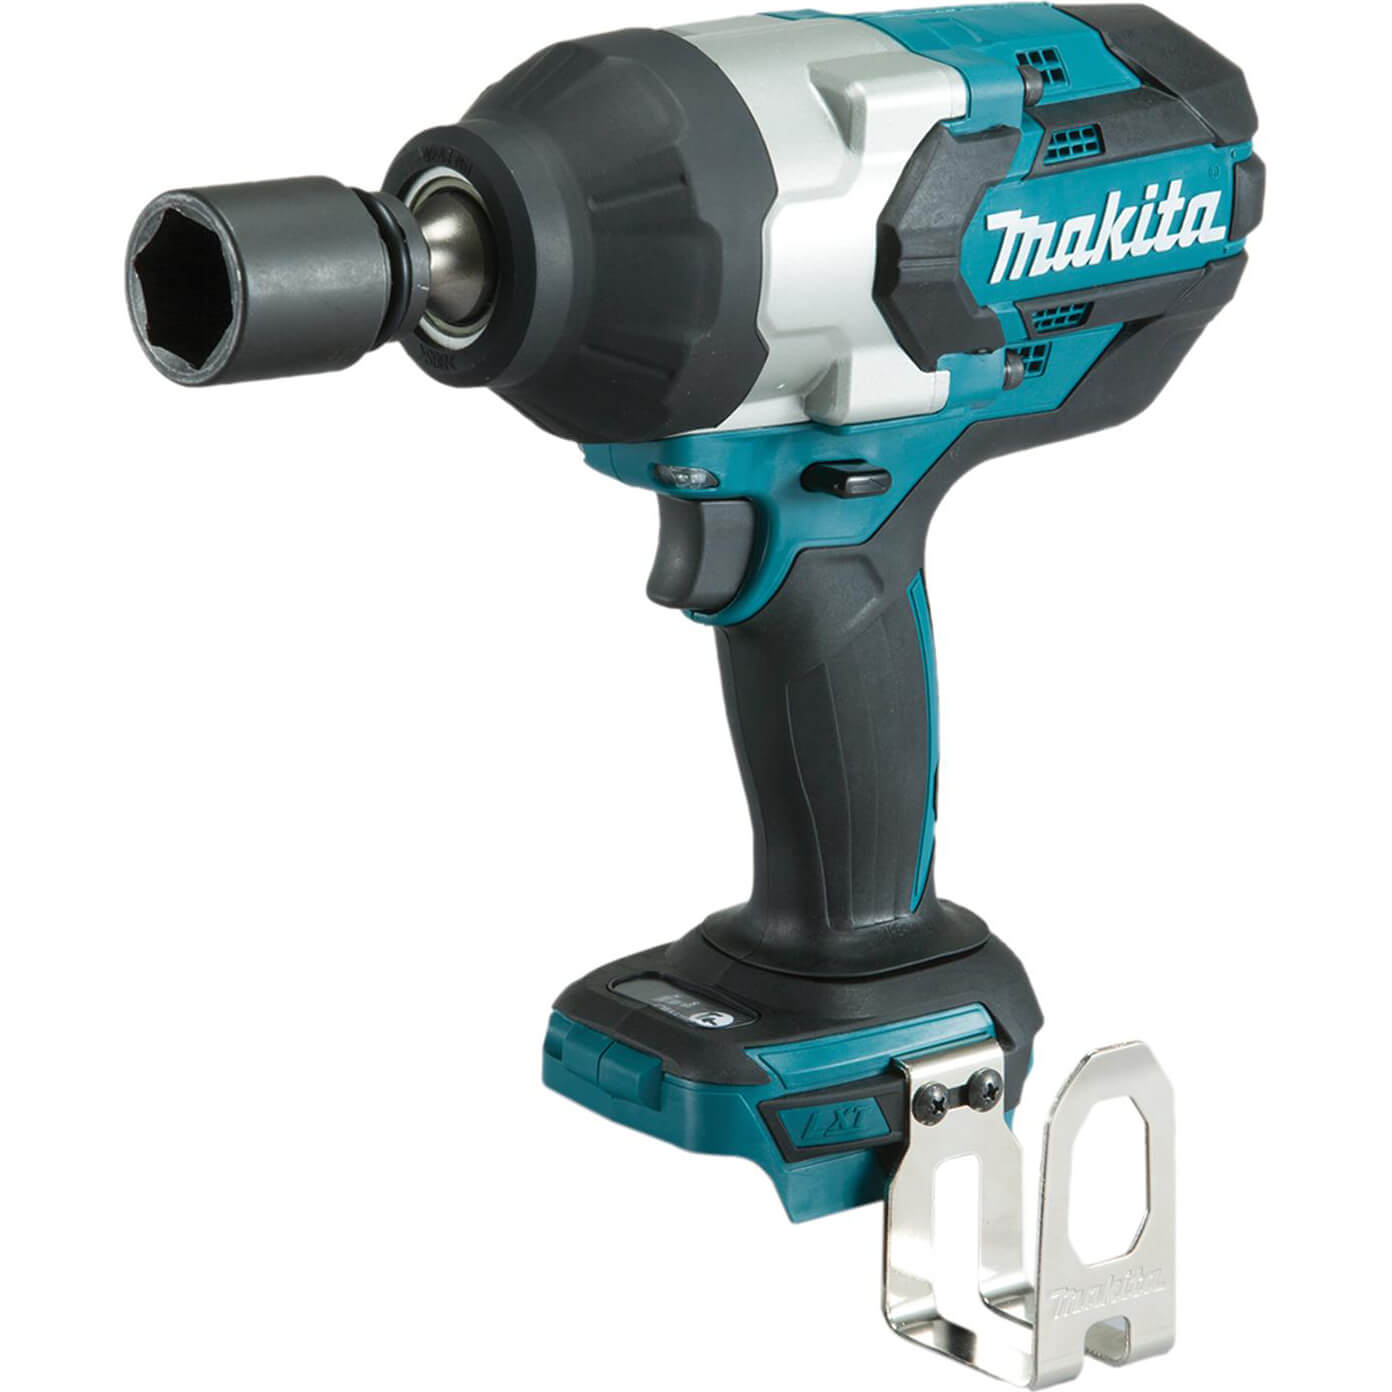 Image of Makita DTW1001 18v LXT Cordless Brushless 3/4" Drive Impact Wrench No Batteries No Charger No Case